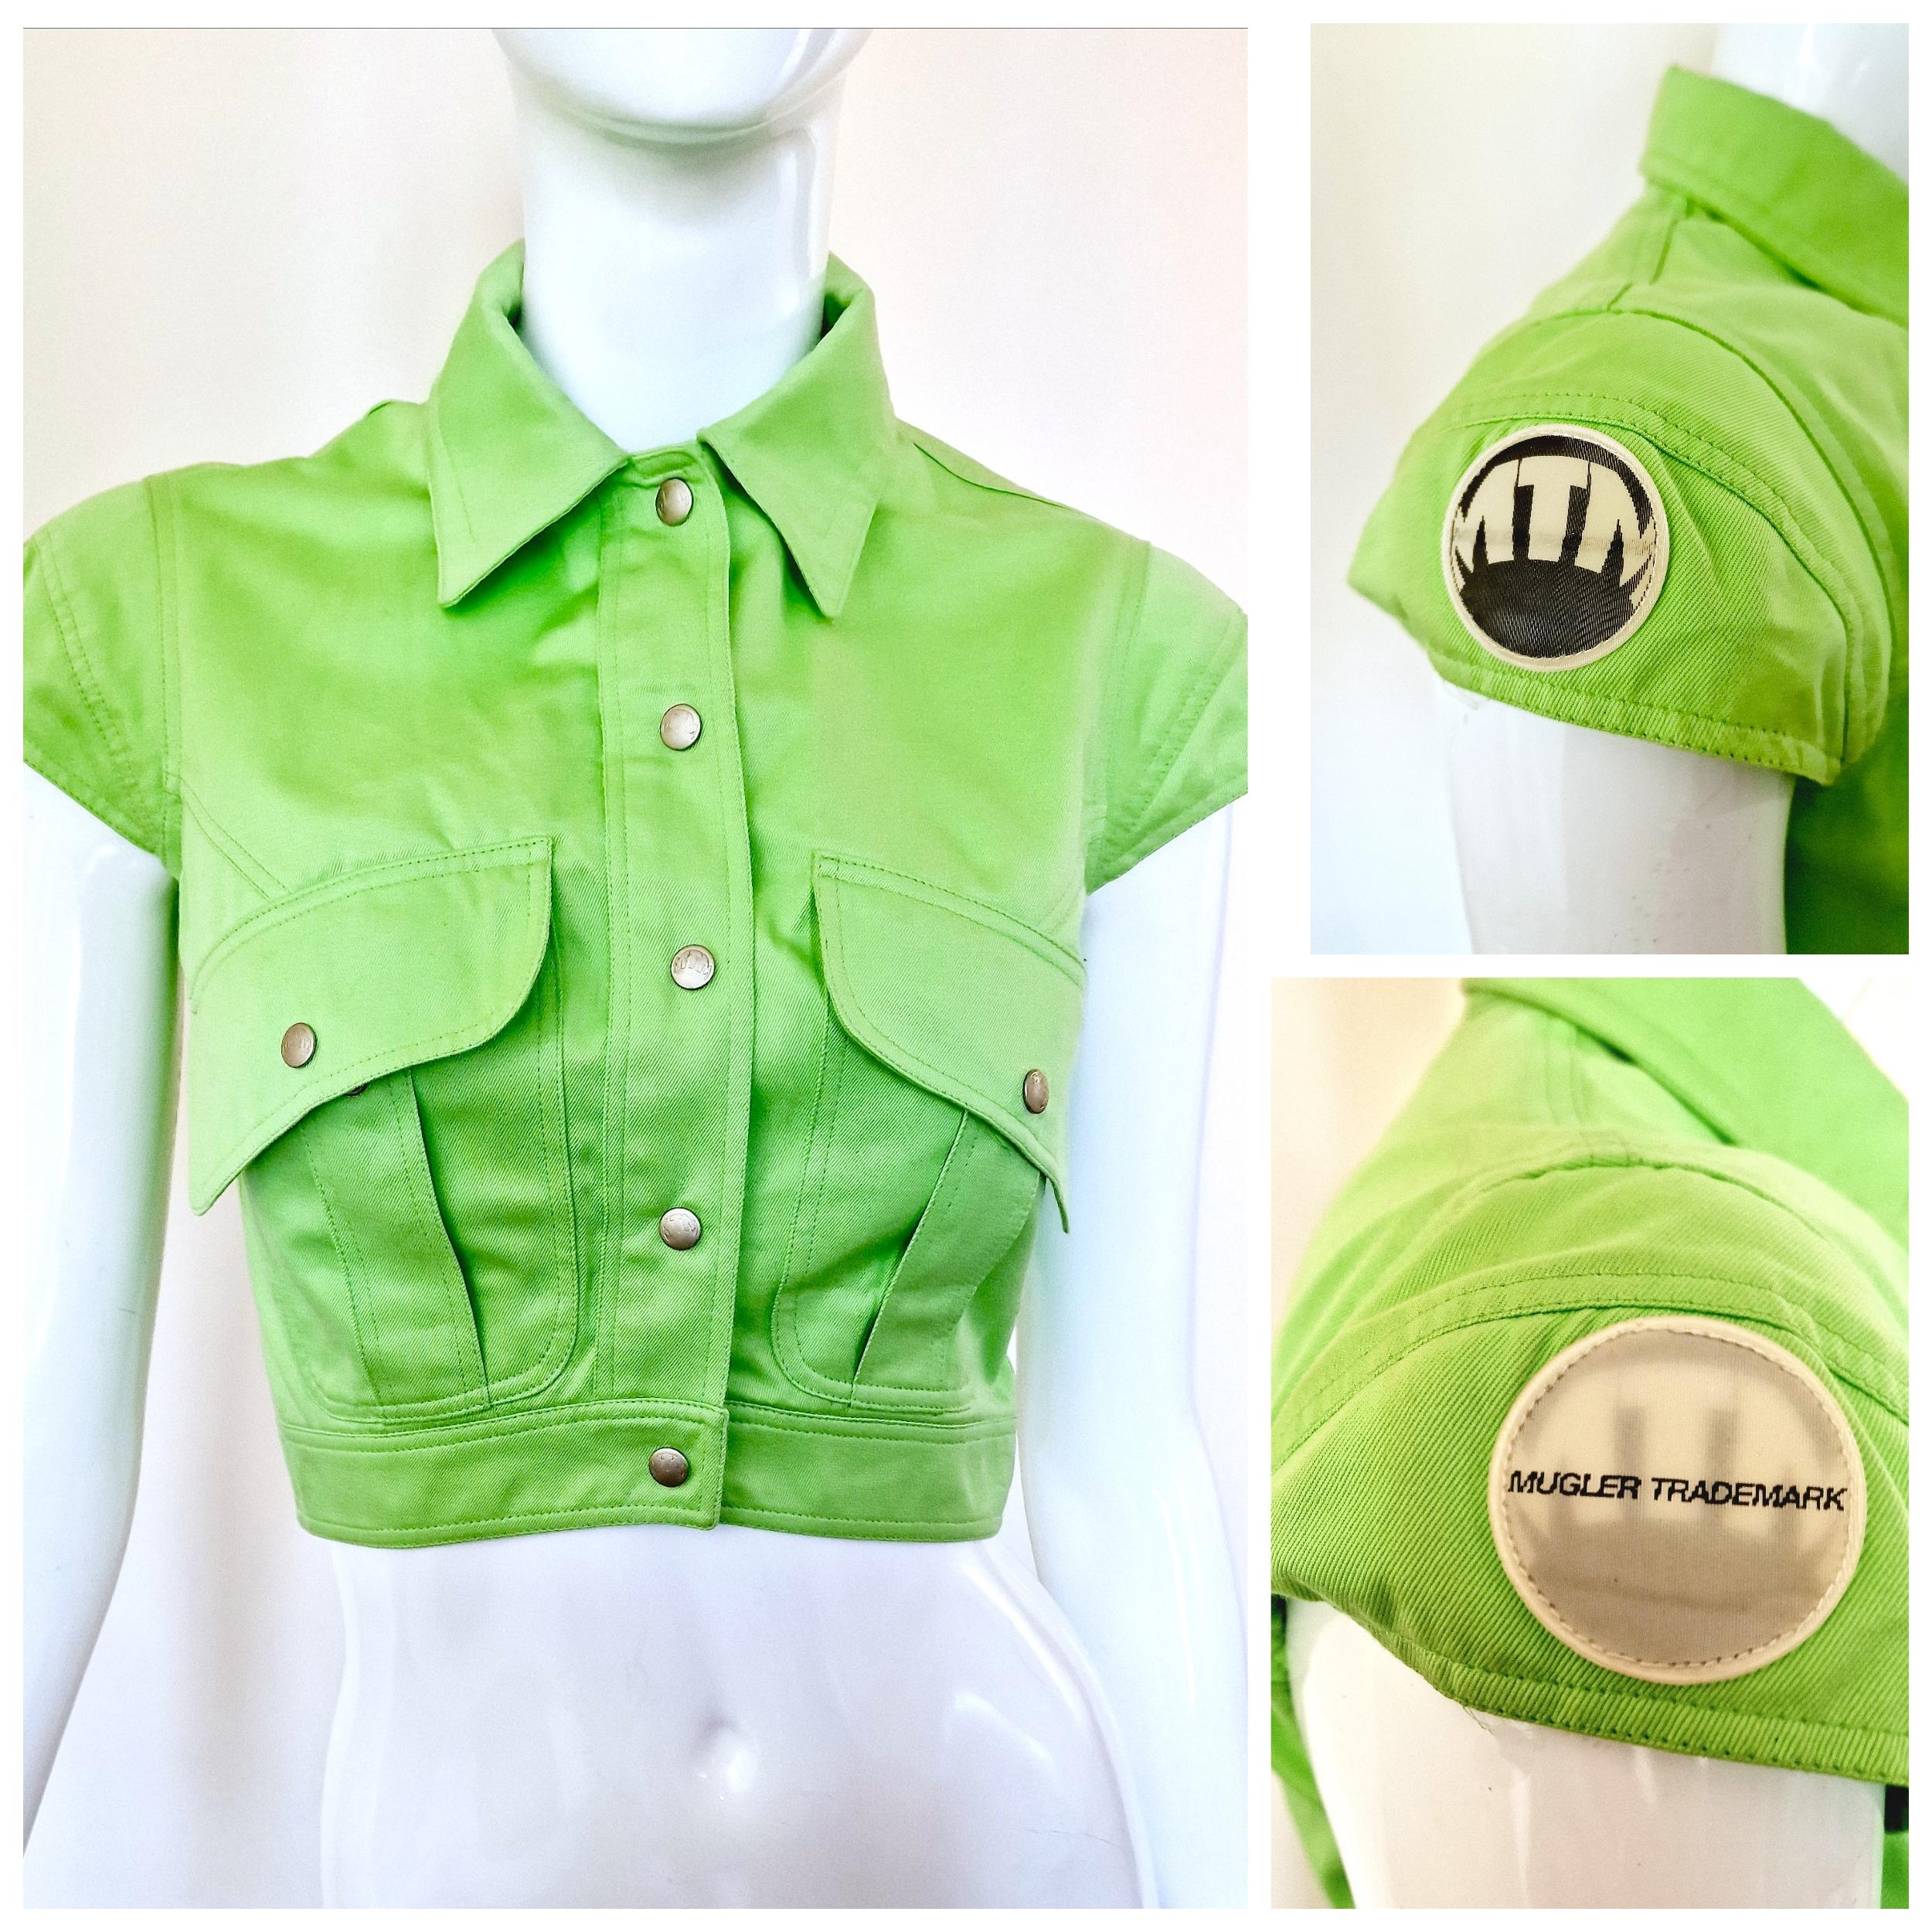 Crop top by Thirry Mugler!
MTM / Mugler Trademark light reflection patch on the sleeve. --> MTM logo / Mugler Trademark
2 front pockets.
*MTM*  buttons!

EXCELLENT condition!

SIZE
Fits from XS to small.
Marked size: FR36.
Length: 40 cm / 15.7